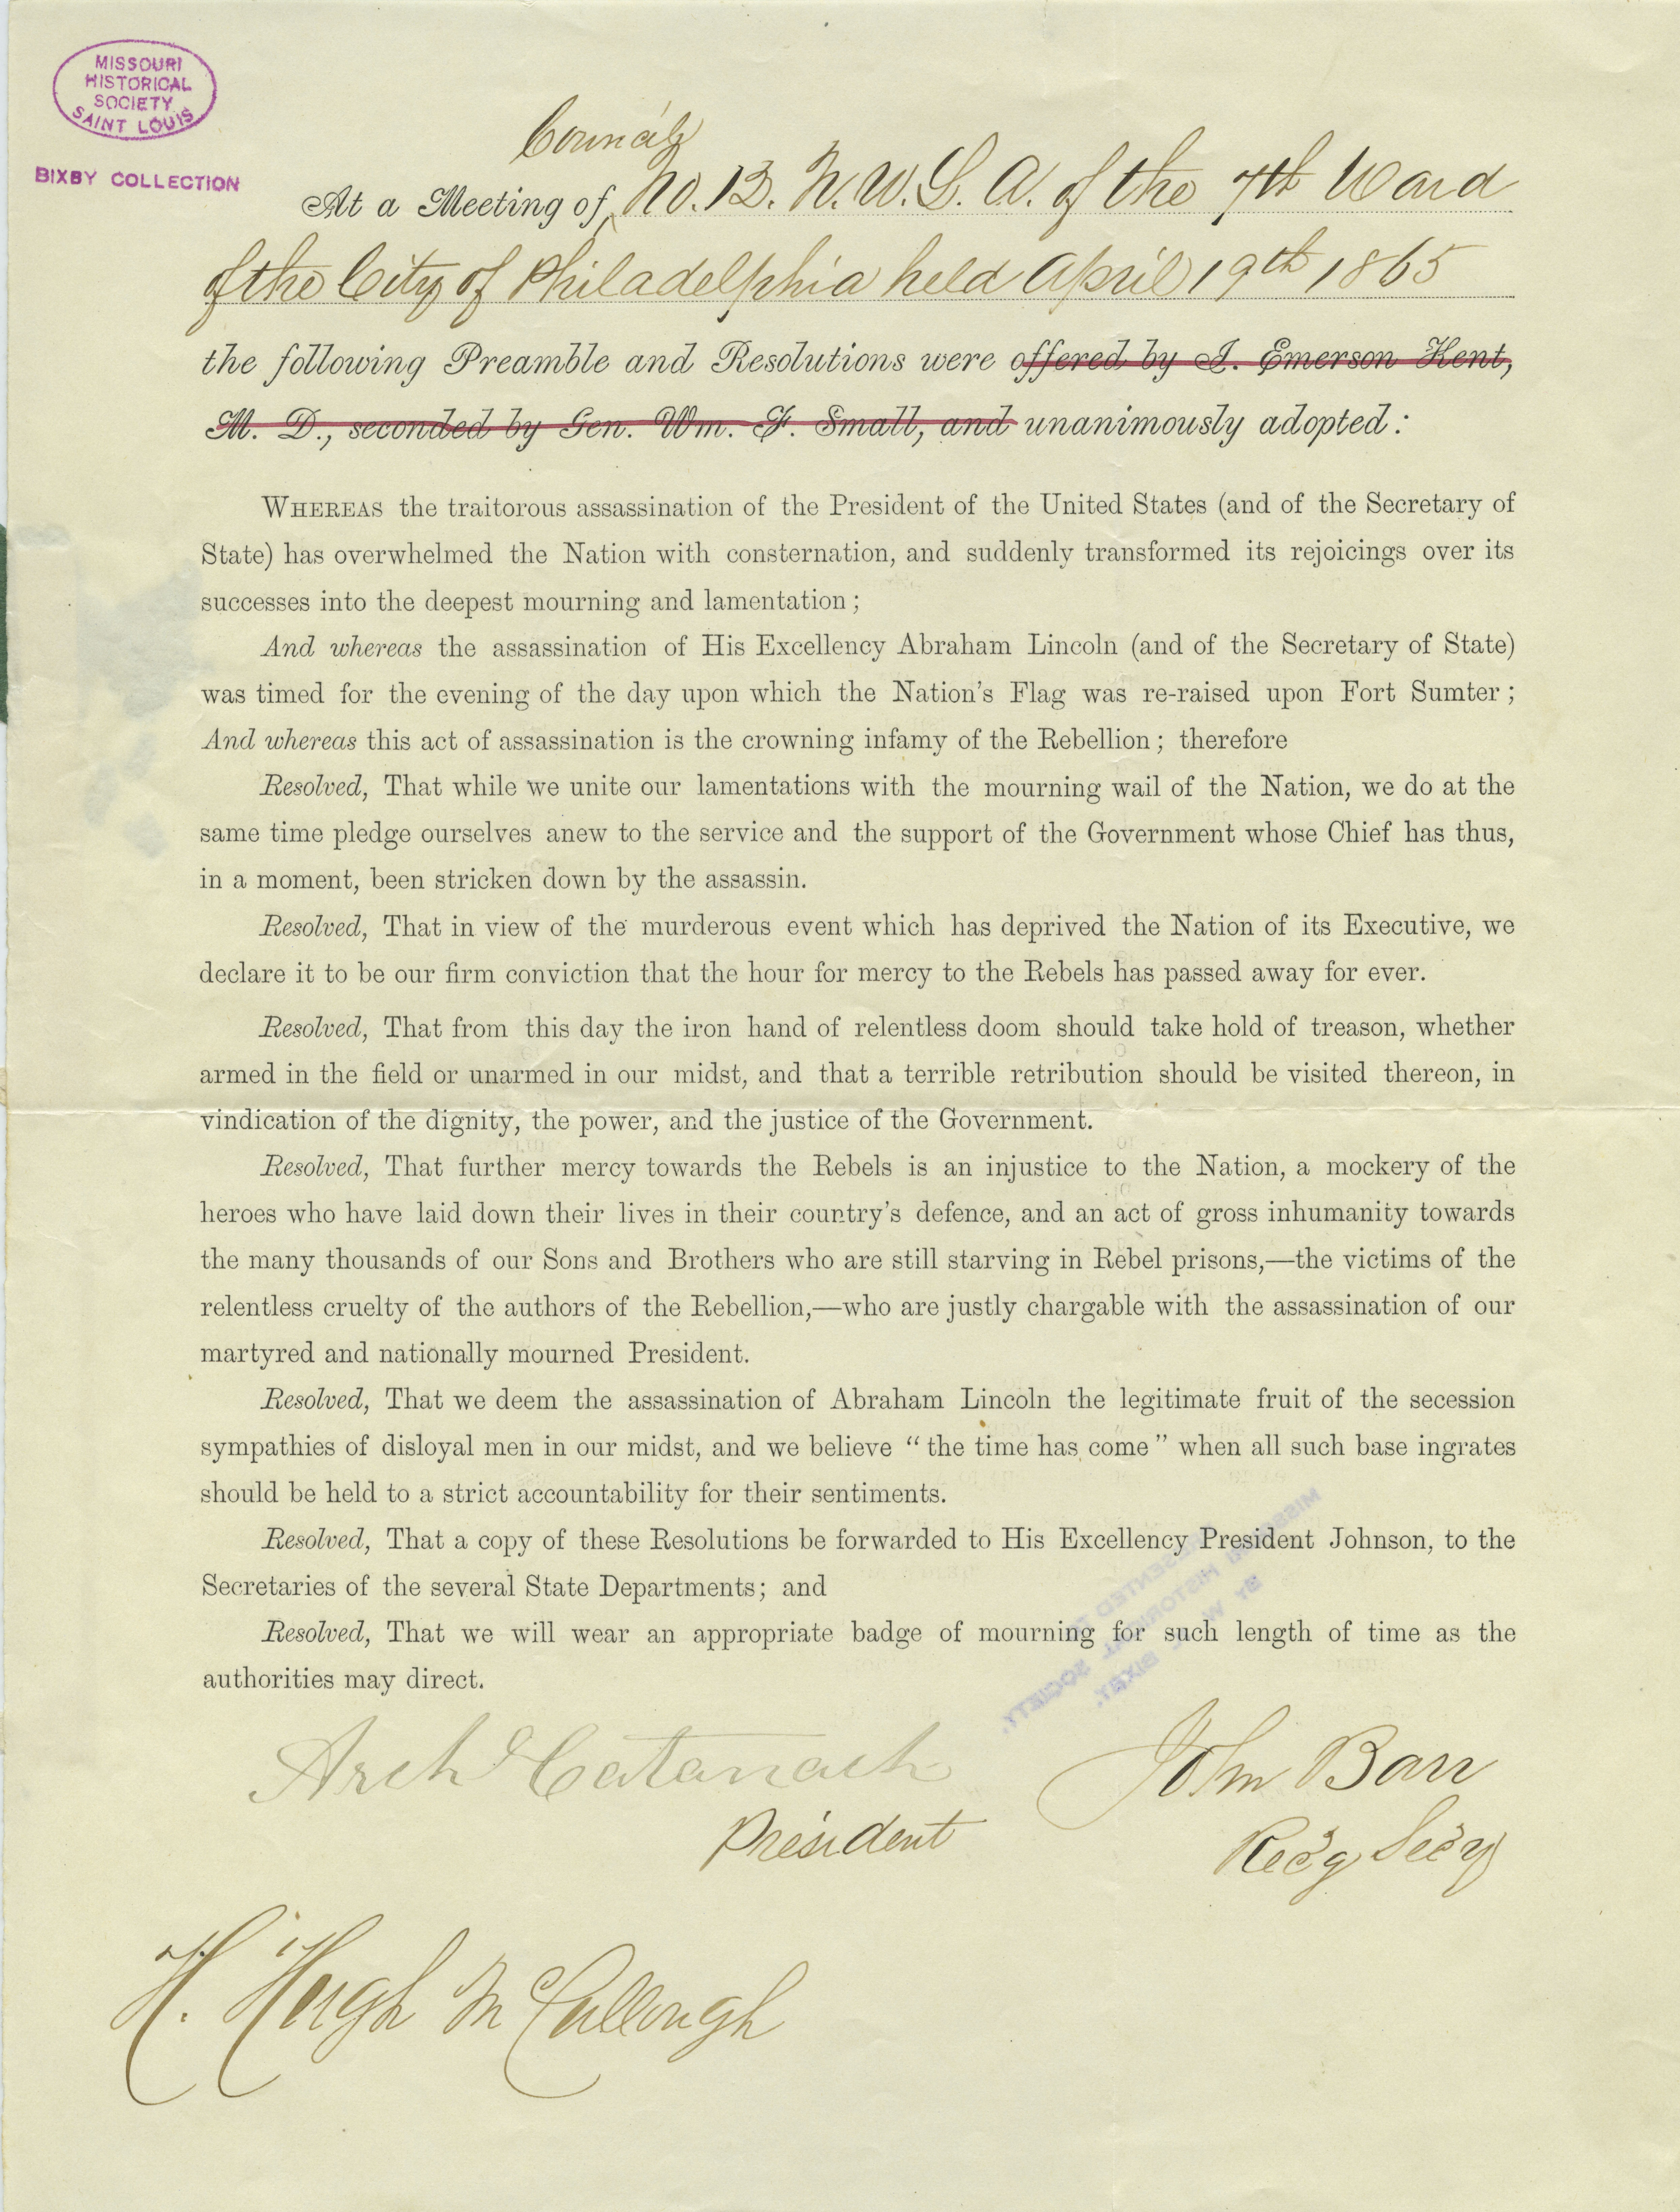 Resolution passed by the 7th Ward of the City of Philadelphia relating to the assassination of the late President Lincoln, April 19, 1865